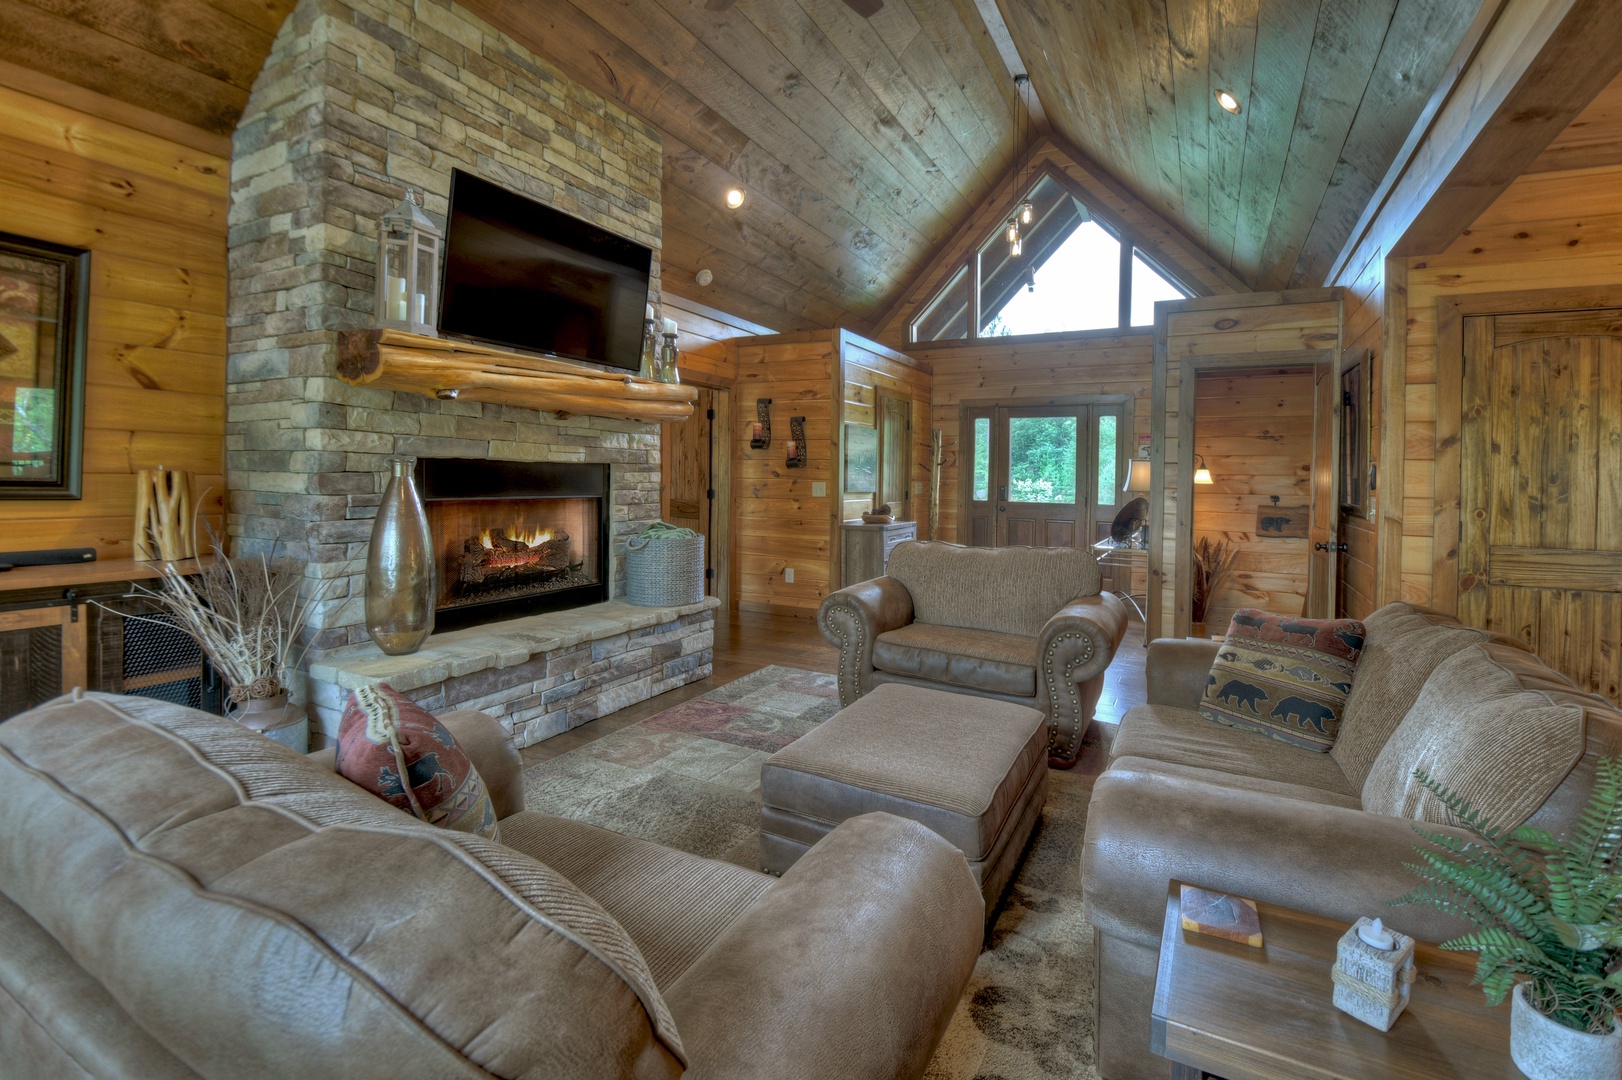 Woodsong - Living Room with Vaulted Ceiling